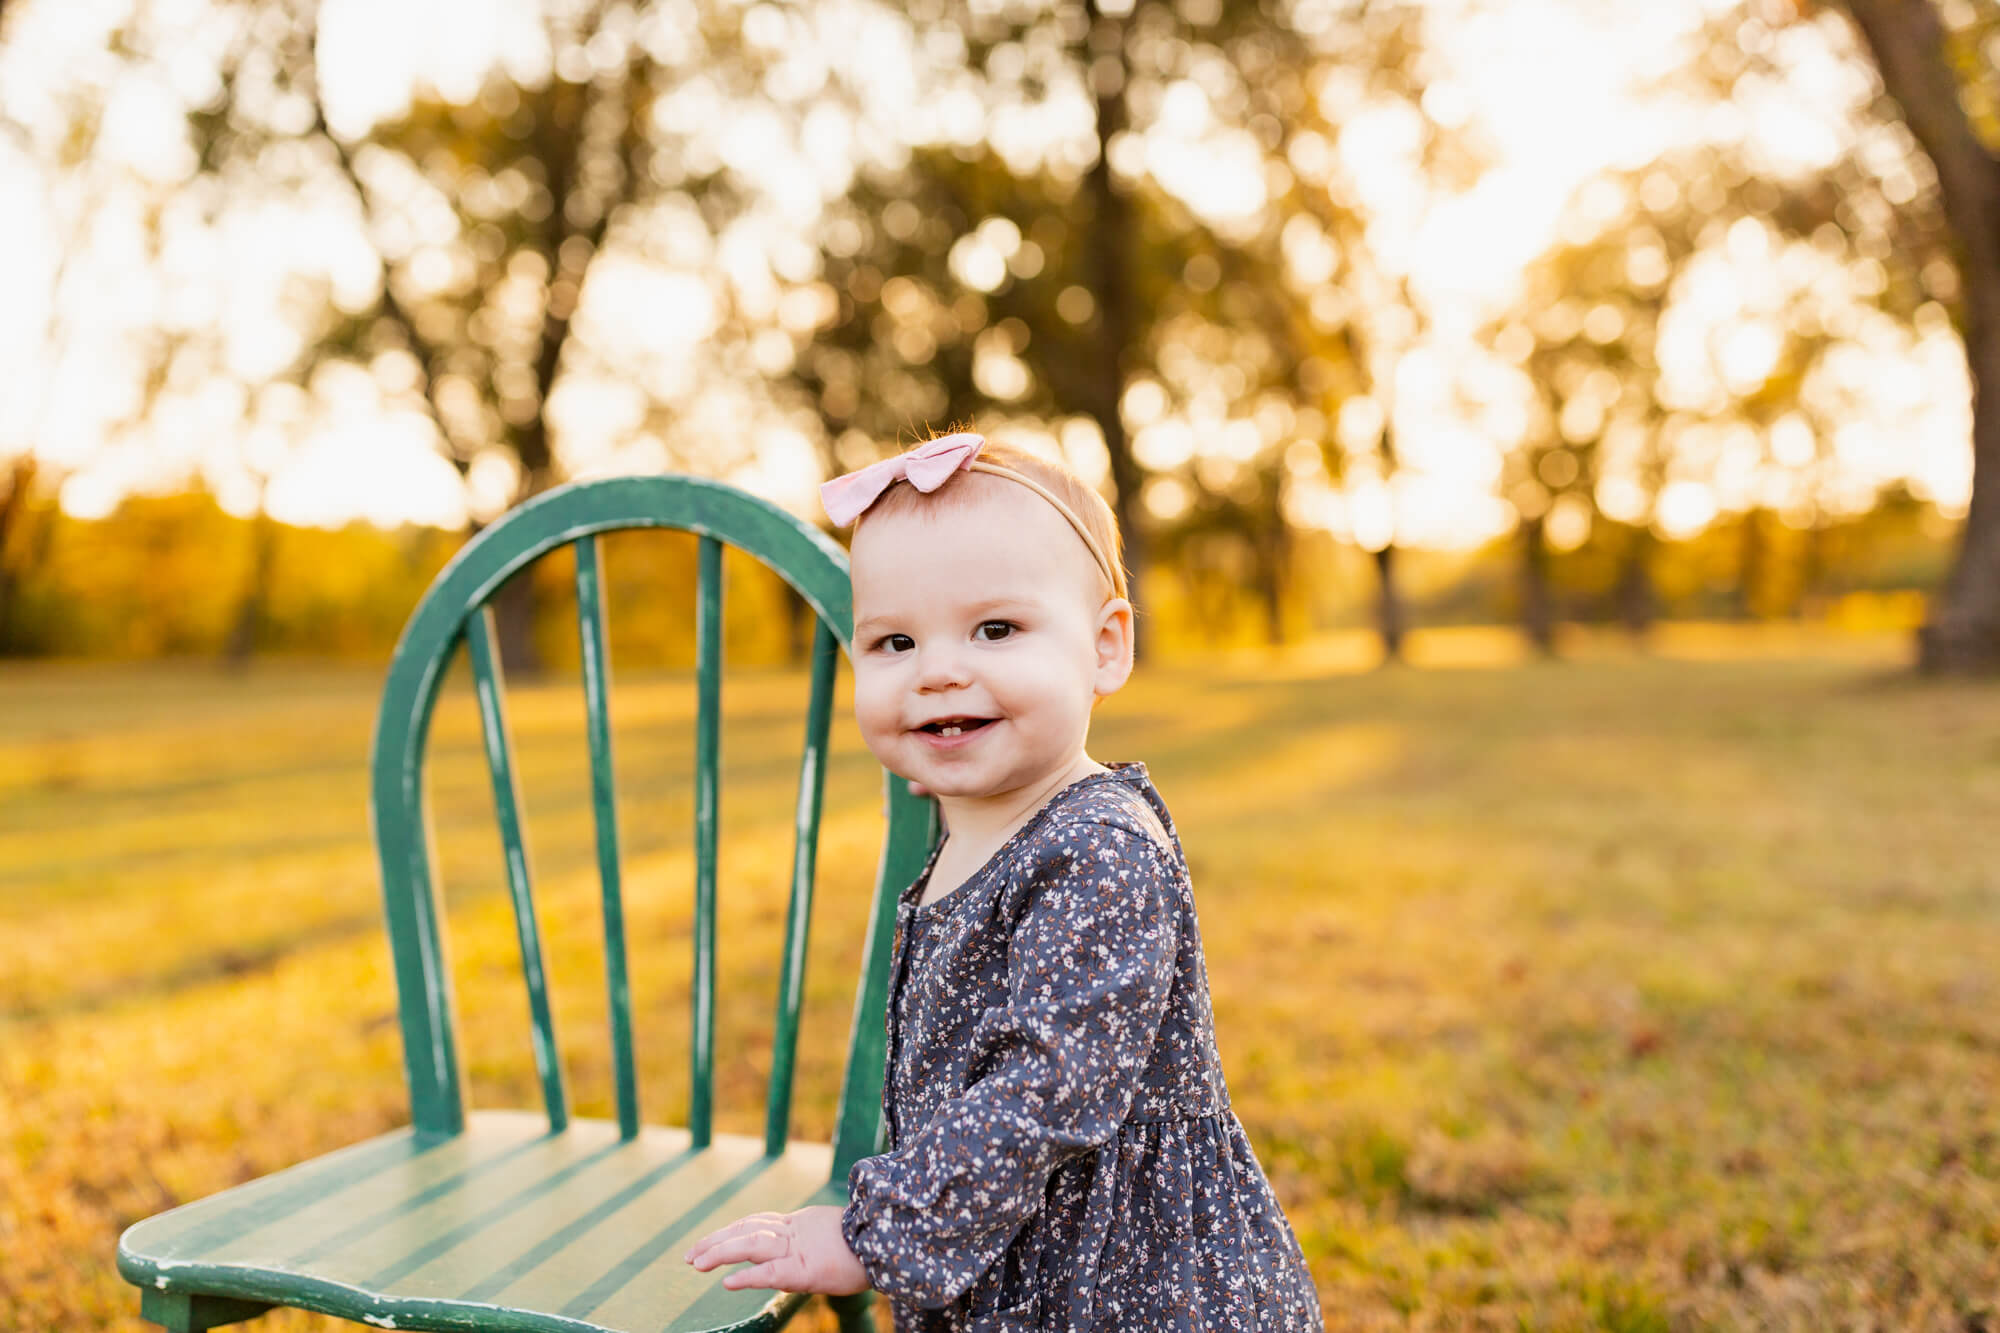 Toddler with two front teeth stands in a patterned dress in a golden field turquoise boutique hoover al